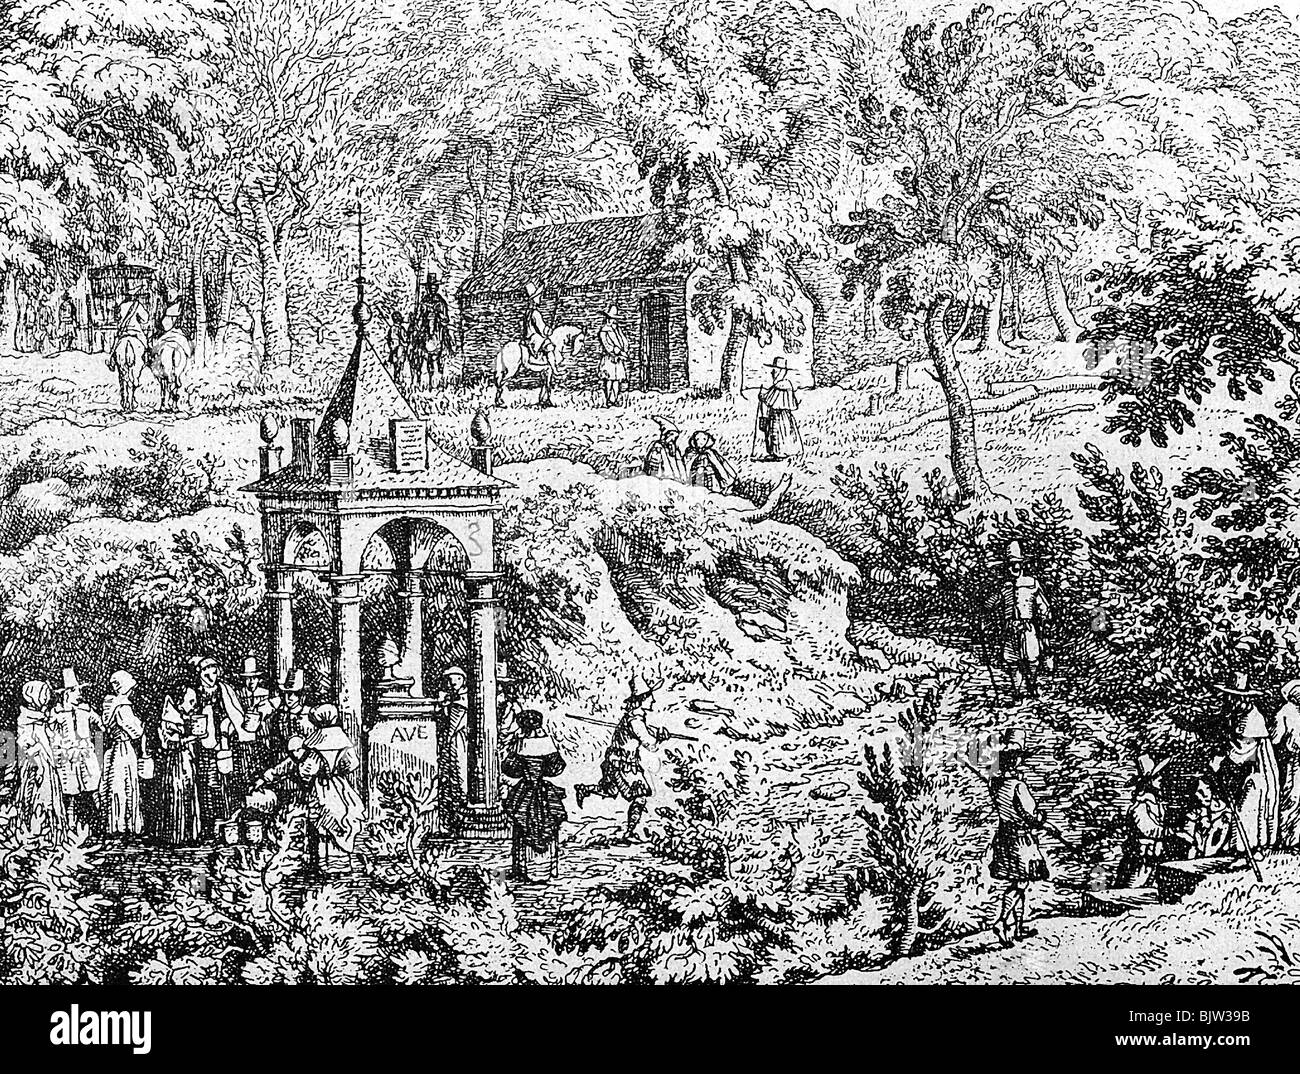 bathing, spa / health resort, patients at a Dutch spa, 17th century, etching by Allart van Everdingen (1621 - 1675), cure, Netherlands, Holland, well, resorts, historic, historical, people, Stock Photo